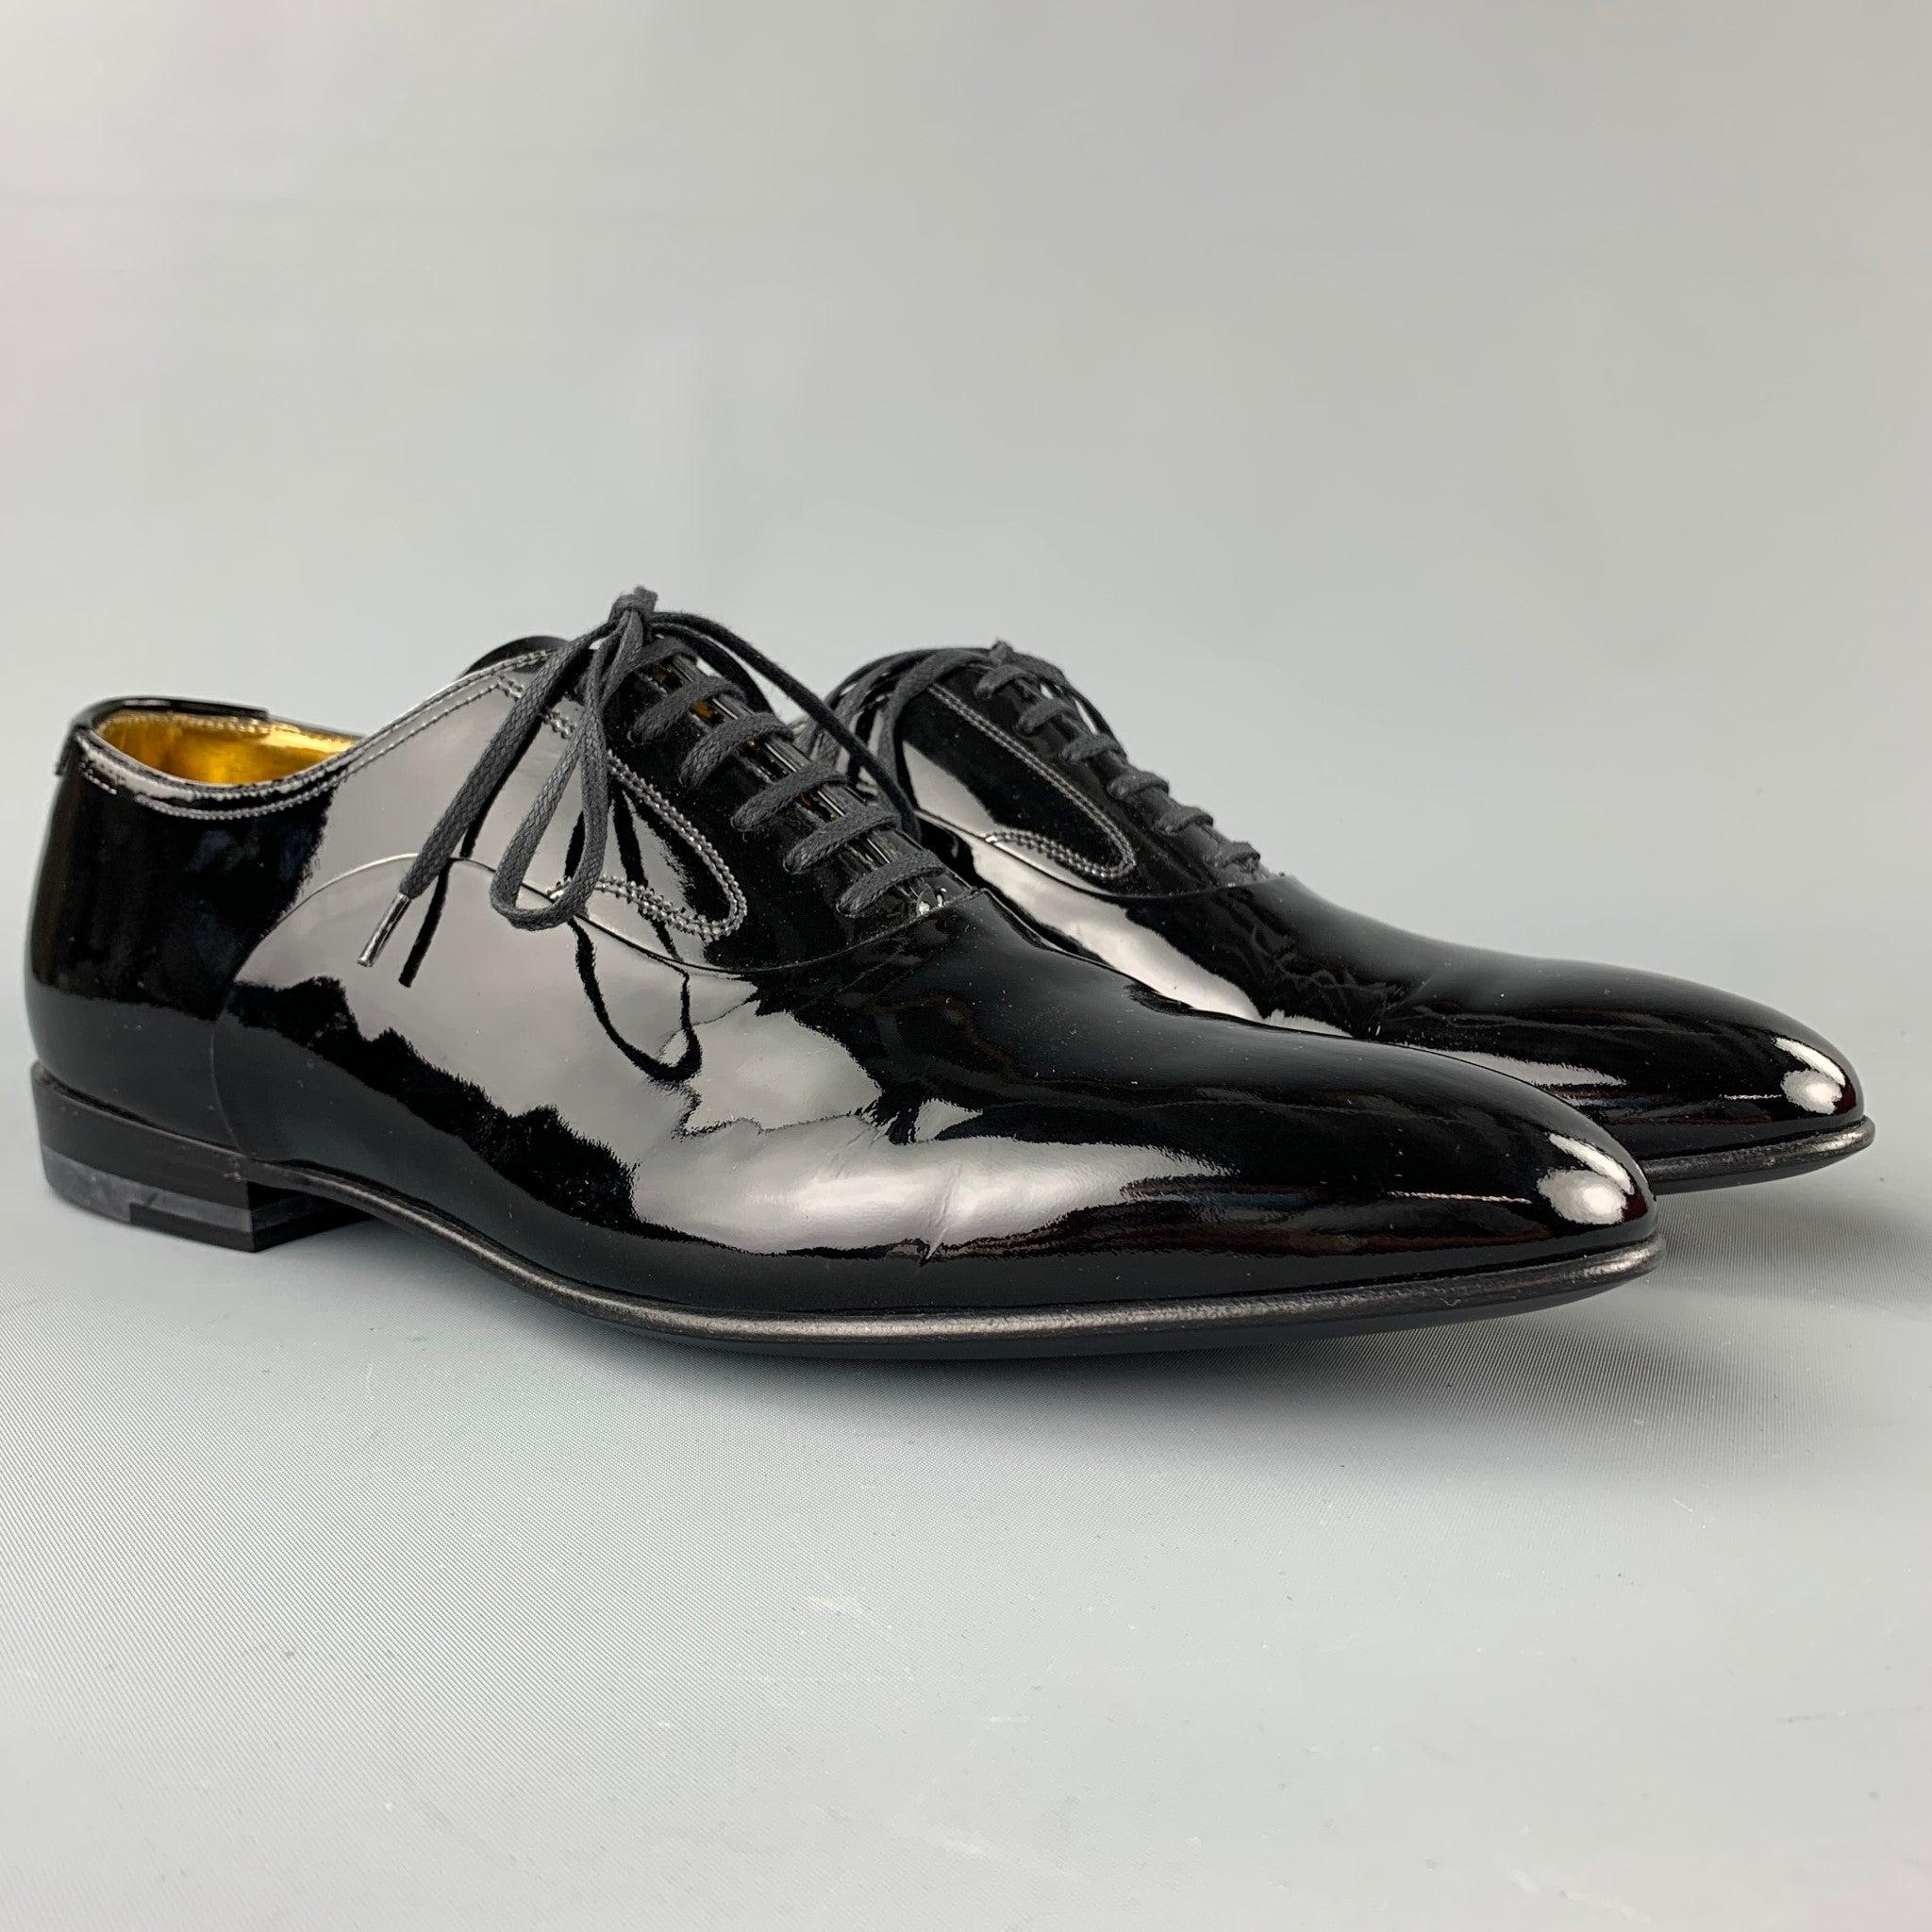 BALLY shoes comes in a black patent leather featuring a cap toe, inner gold tone interior, wooden sole, and a lace up closure. Made in Switzerland.New With Box.
 

Marked:   EU 7 / US 8  

Measurements: 
  11.5 inches  x 3.5 inches 
  
  
